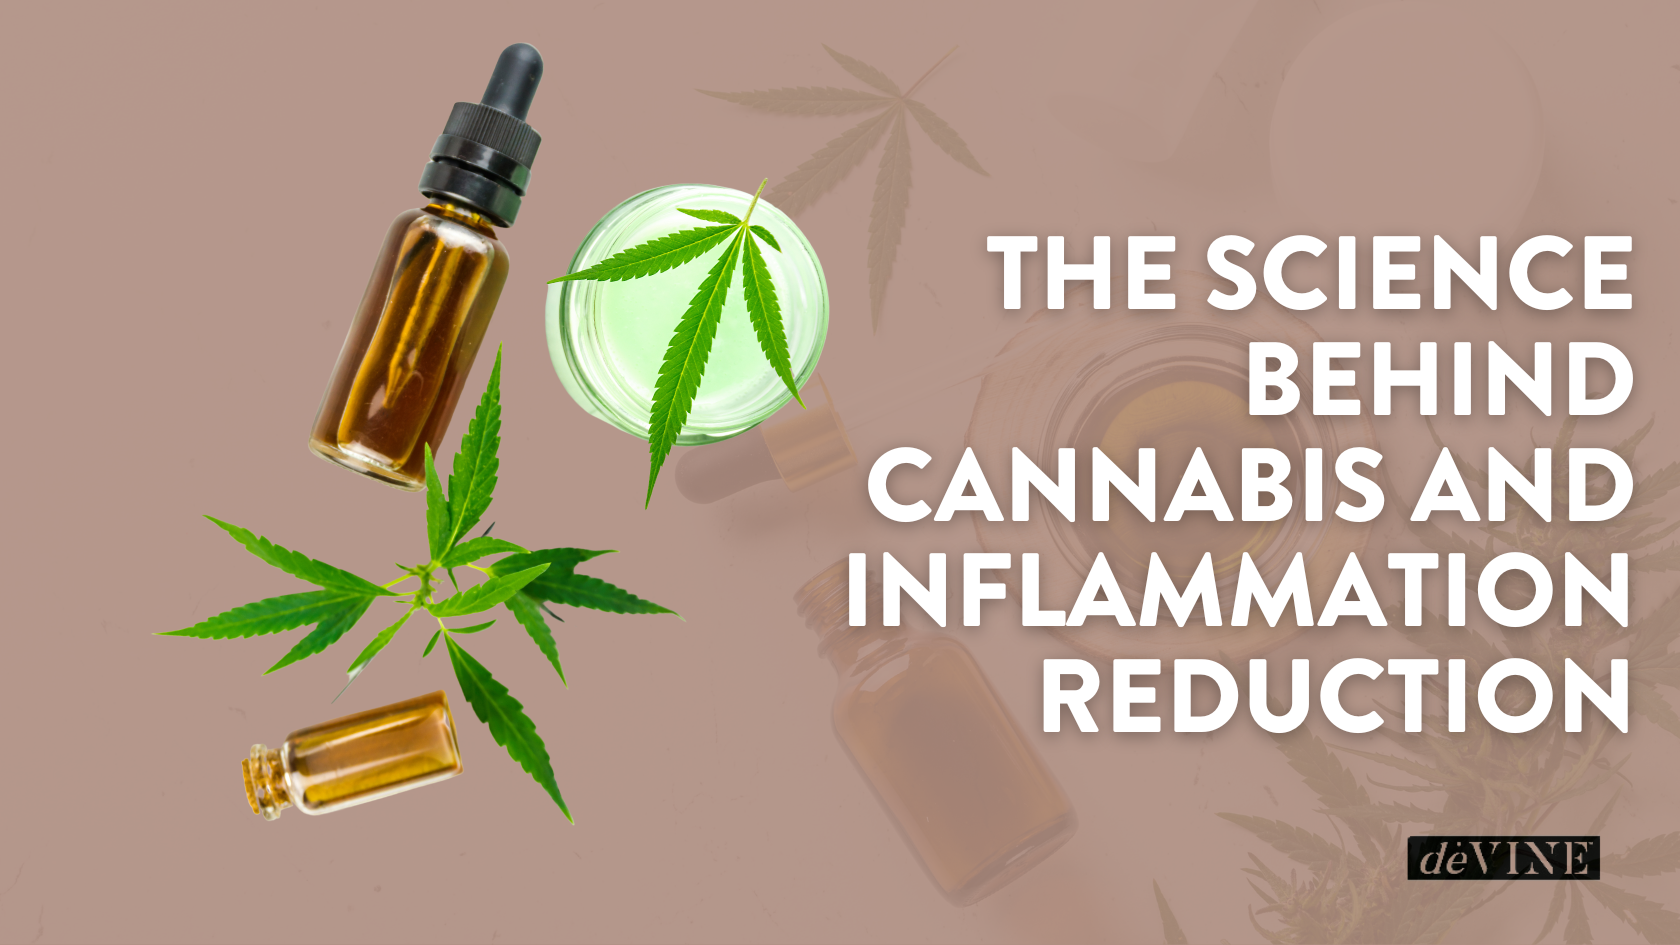 The Science Behind Cannabis and Inflammation Reduction